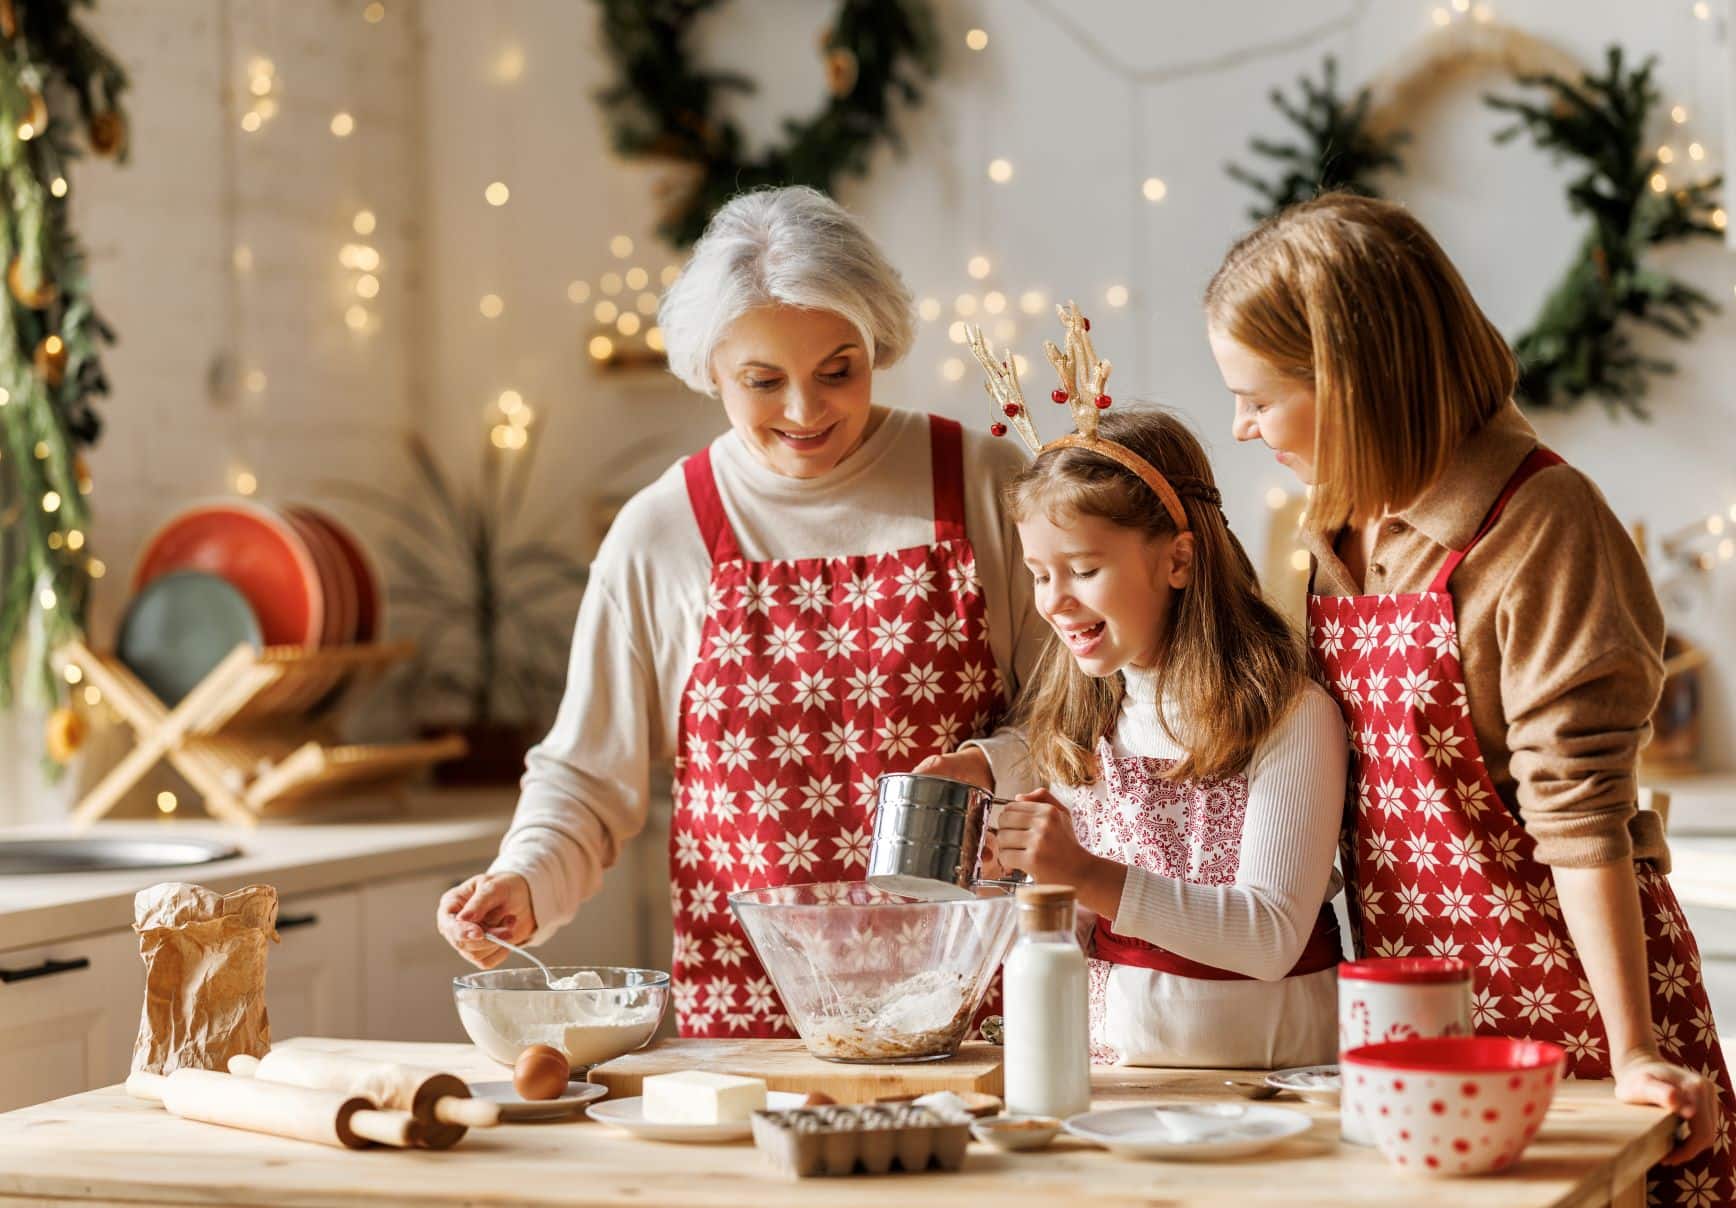 old woman, adult woman, and young girl making cookies together